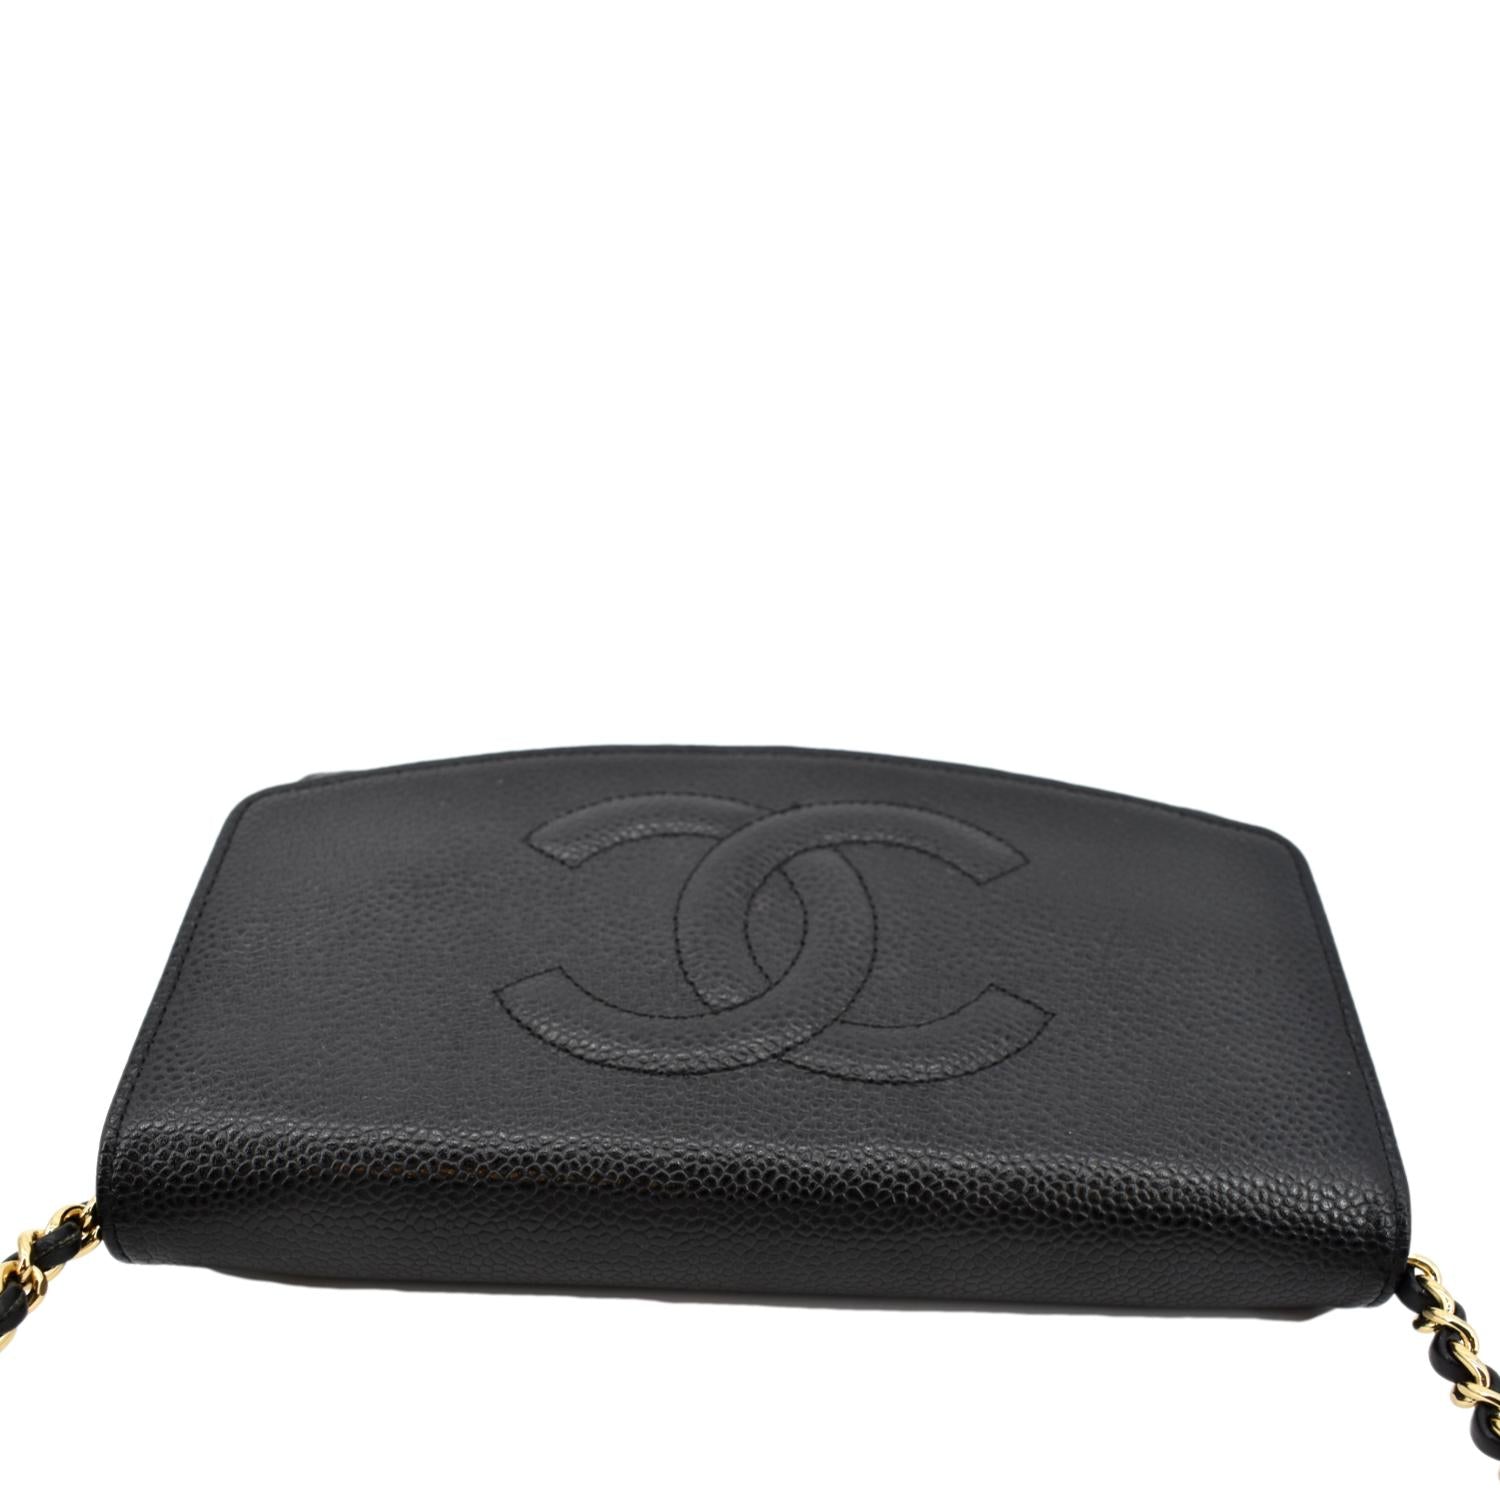 CHANEL, Bags, Vintage Chanel Caviar Cc Timeless French Wallet With Chain